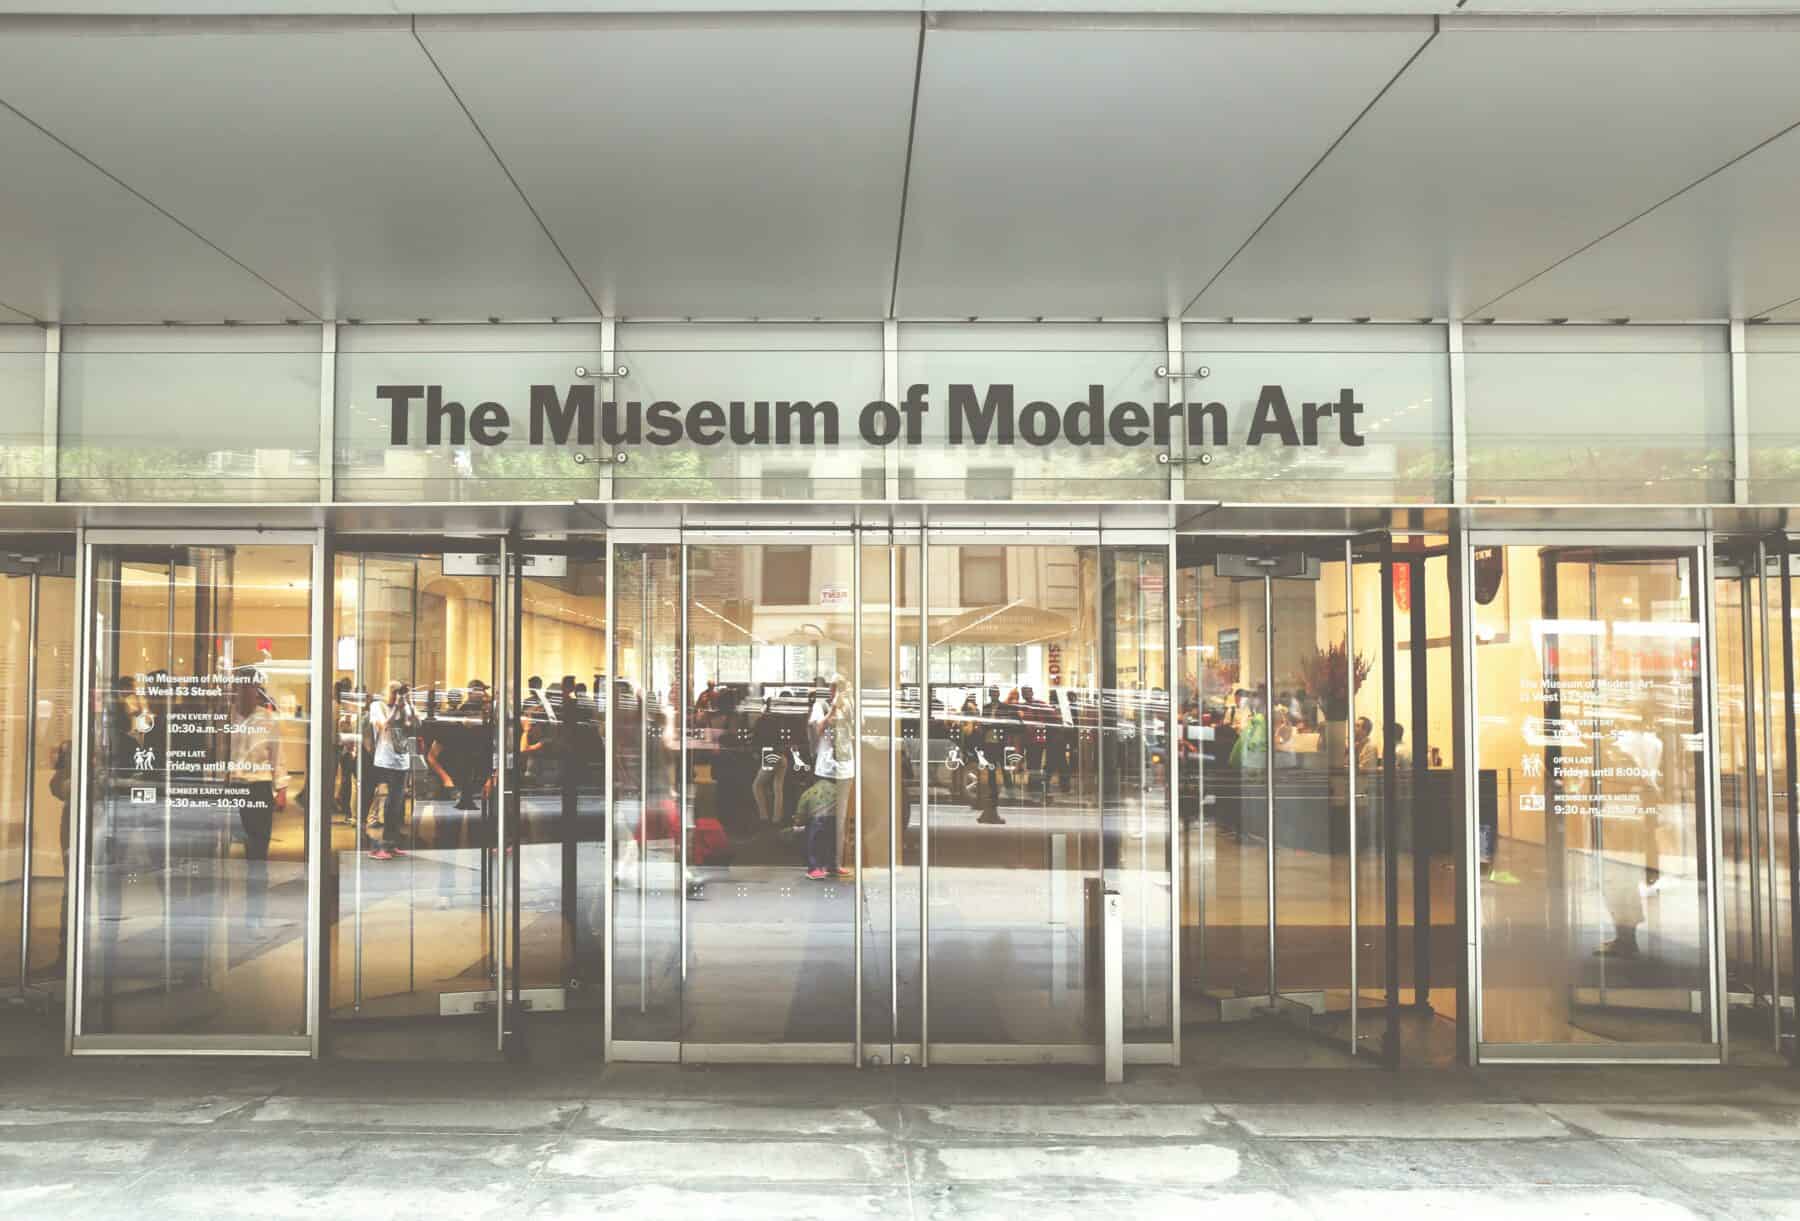 Entrance to the Museum of Modern Art